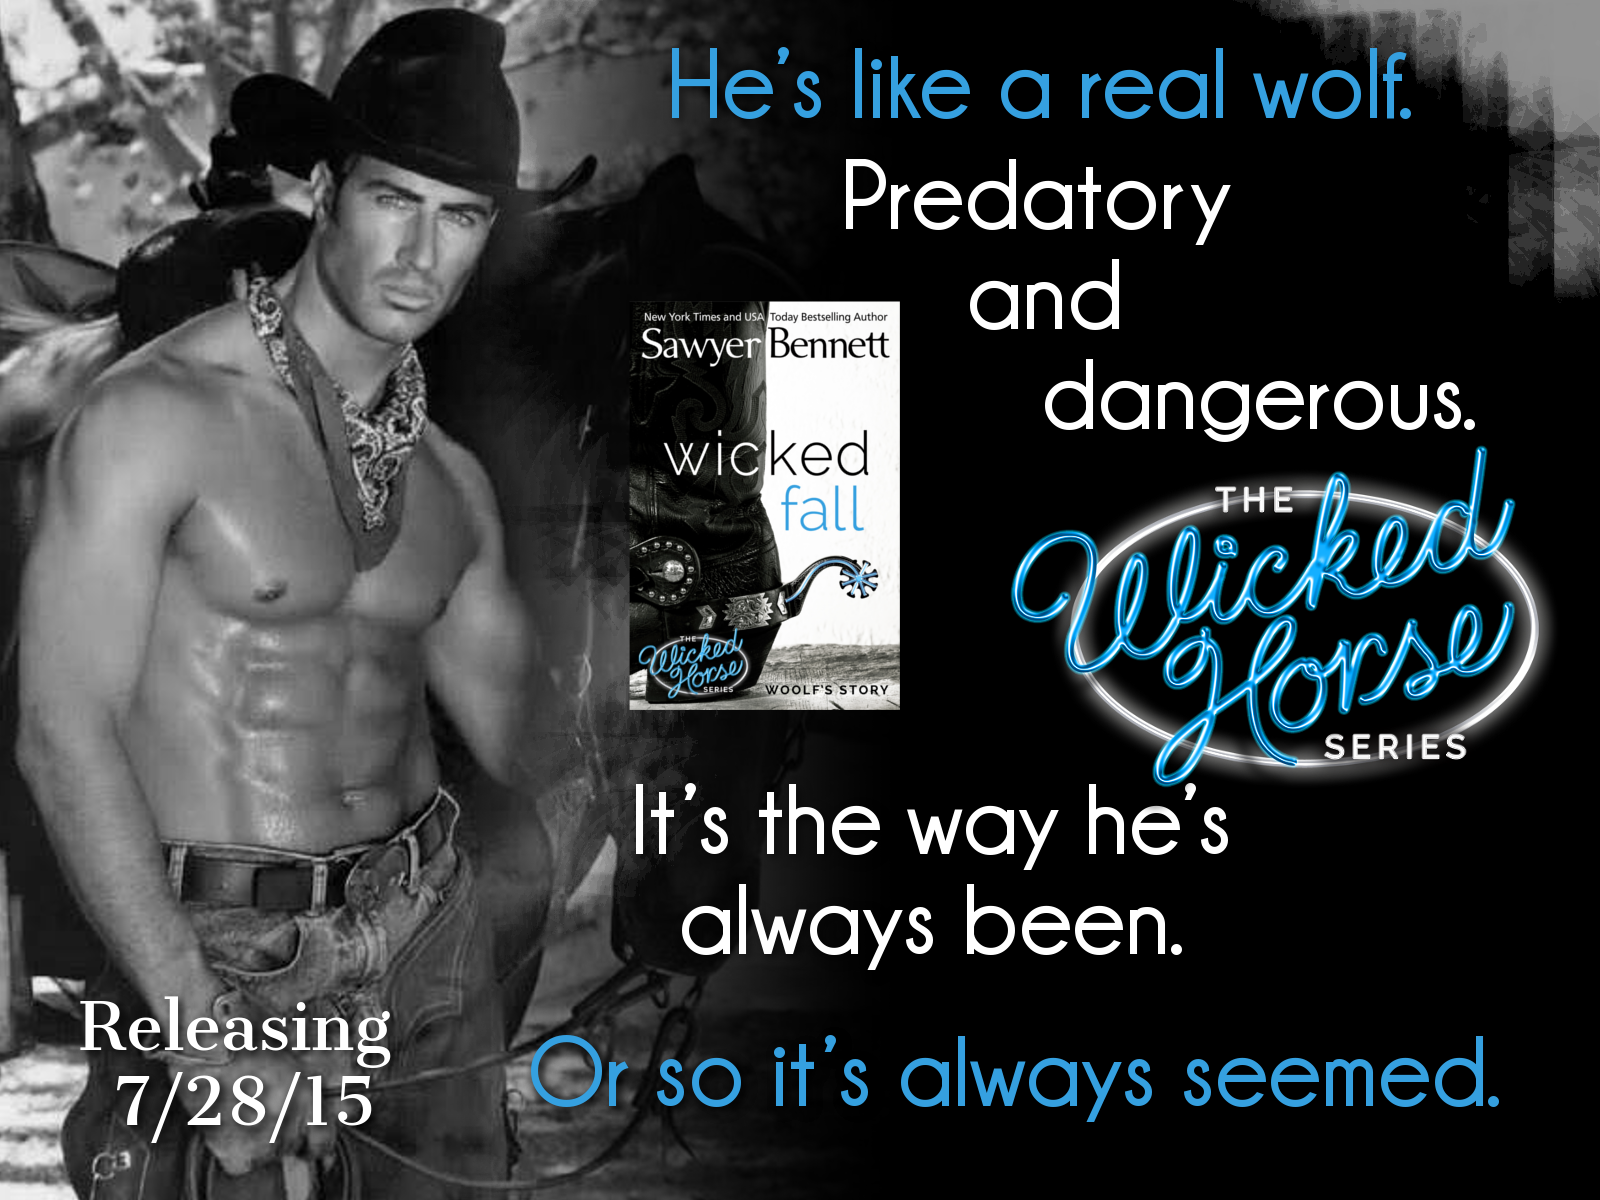 %name A Spicy Latte cowboy romance that sizzles   Wicked Fall blog tour & giveaway